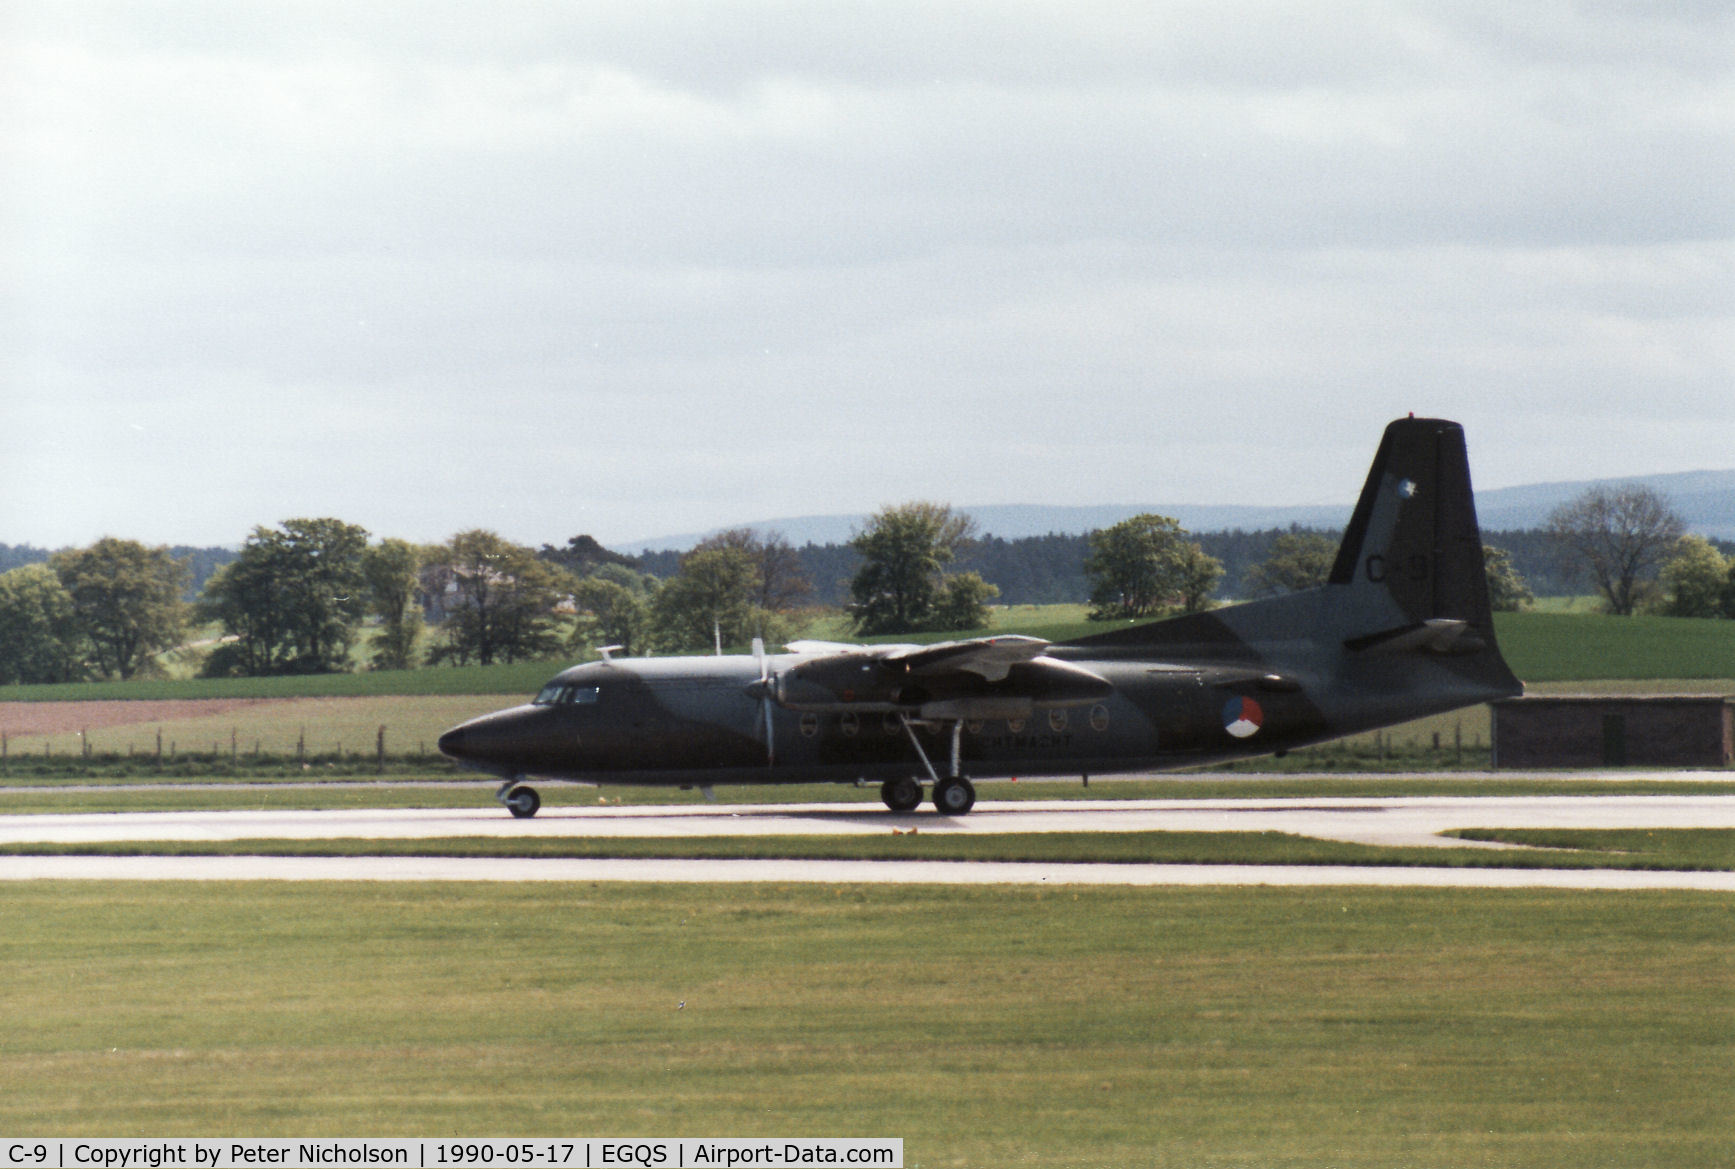 C-9, 1960 Fokker F-27-300M Troopship C/N 10159, F-27 Troopship of 334 Squadron Royal Netherlands Air Force preparing for take-off at RAF Lossiemouth in May 1990.